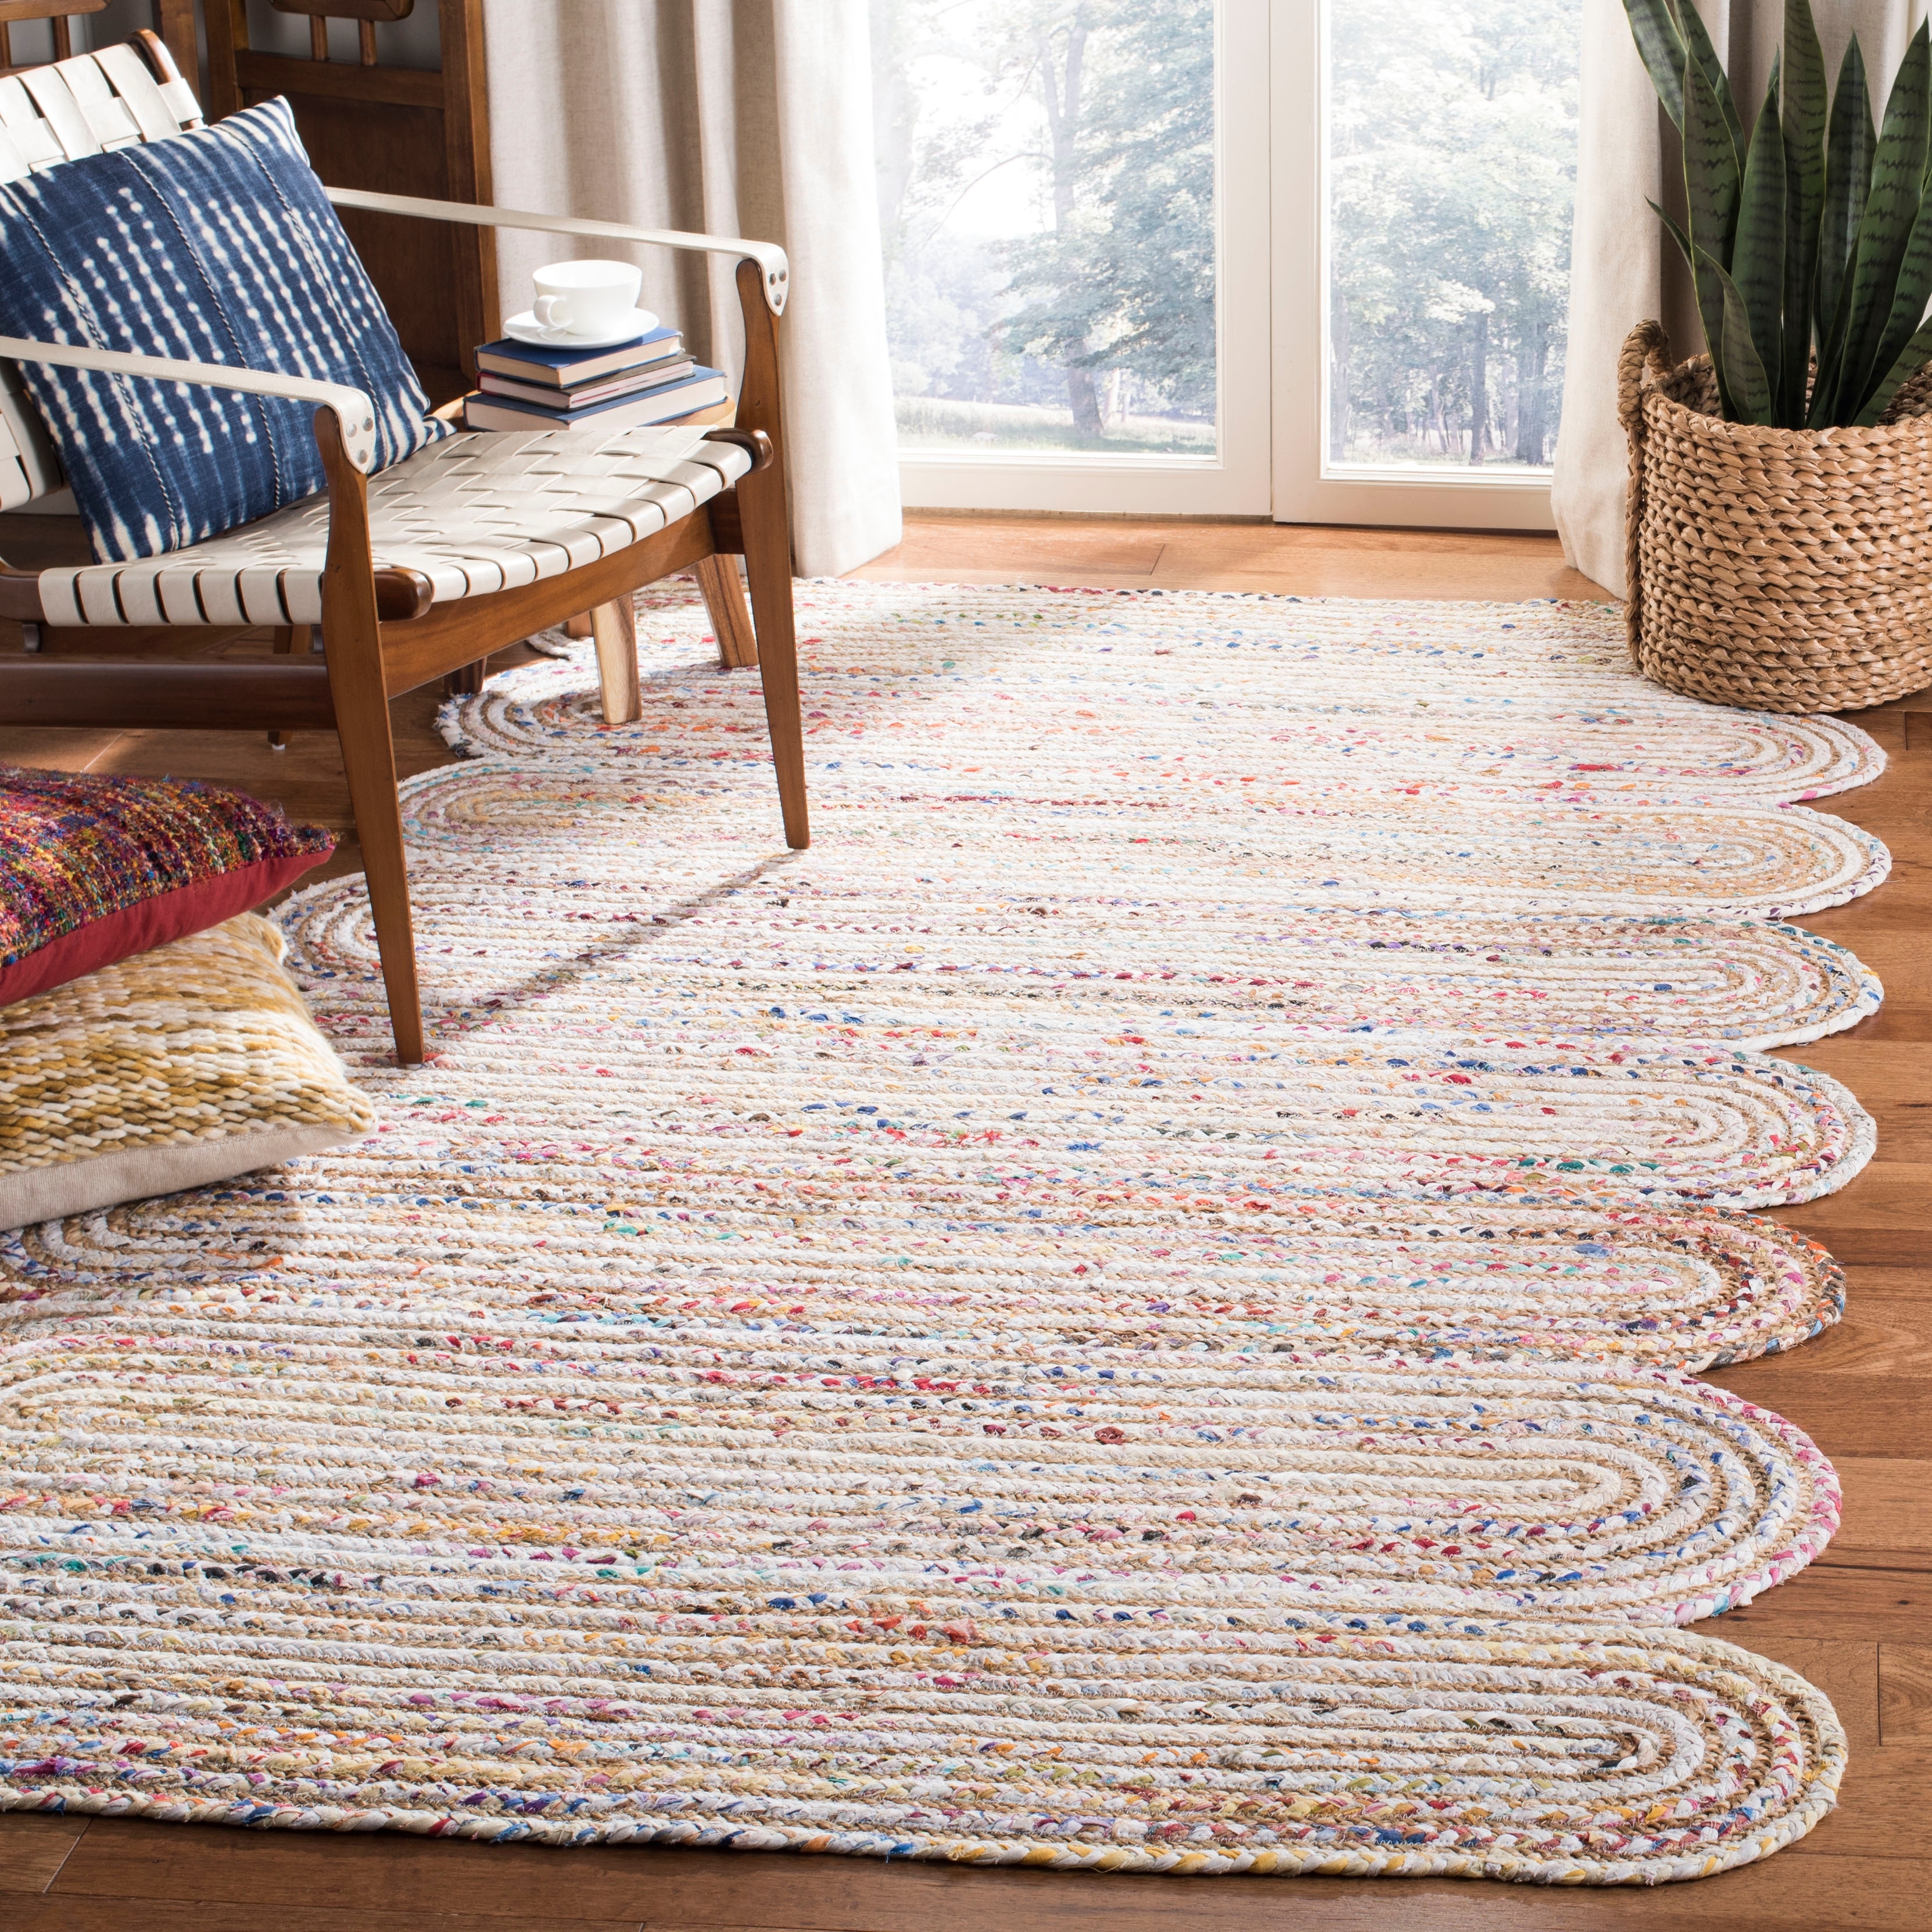 THE BEER VALLEY Jute Braided Boho Area Rug, 4' Round - Natural, Hand Woven  Farmhouse Reversible Rugs for Living Room, Kitchen, Bedroom - 4 Feet Round